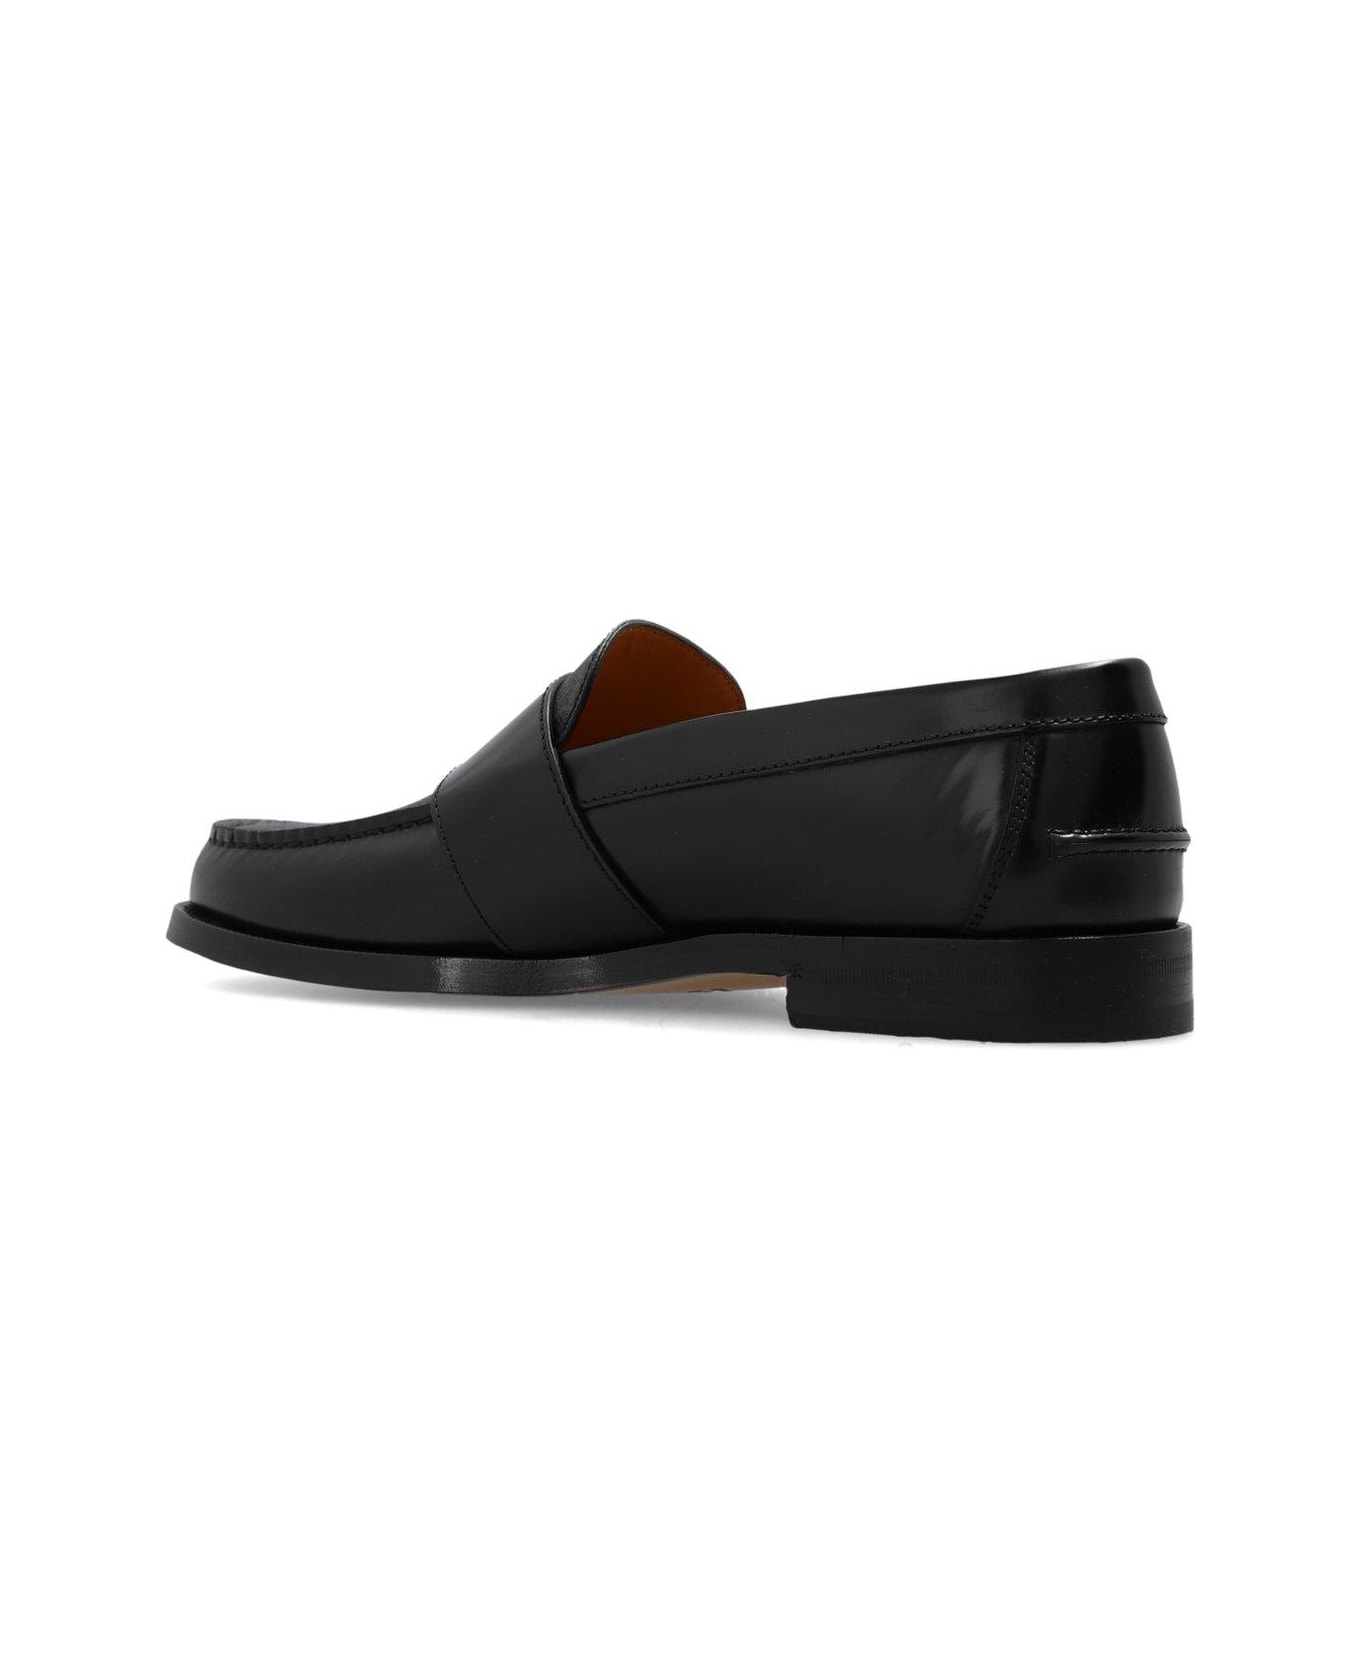 Gucci Buckle Detailed Loafers - Black ローファー＆デッキシューズ